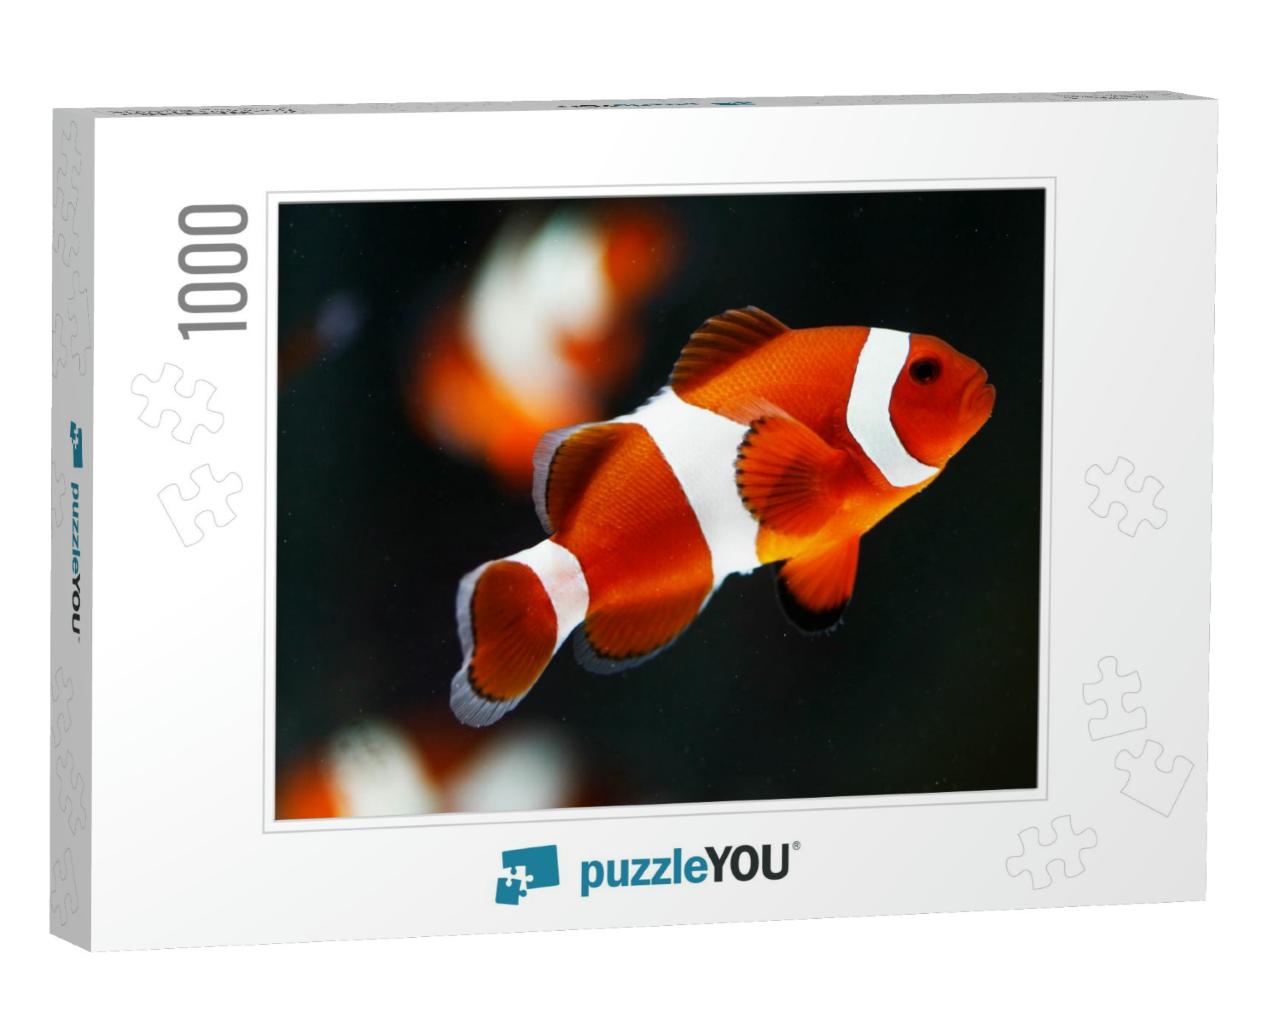 False Percala Clownfish or Ocellaris Clownfish Amphiprion... Jigsaw Puzzle with 1000 pieces